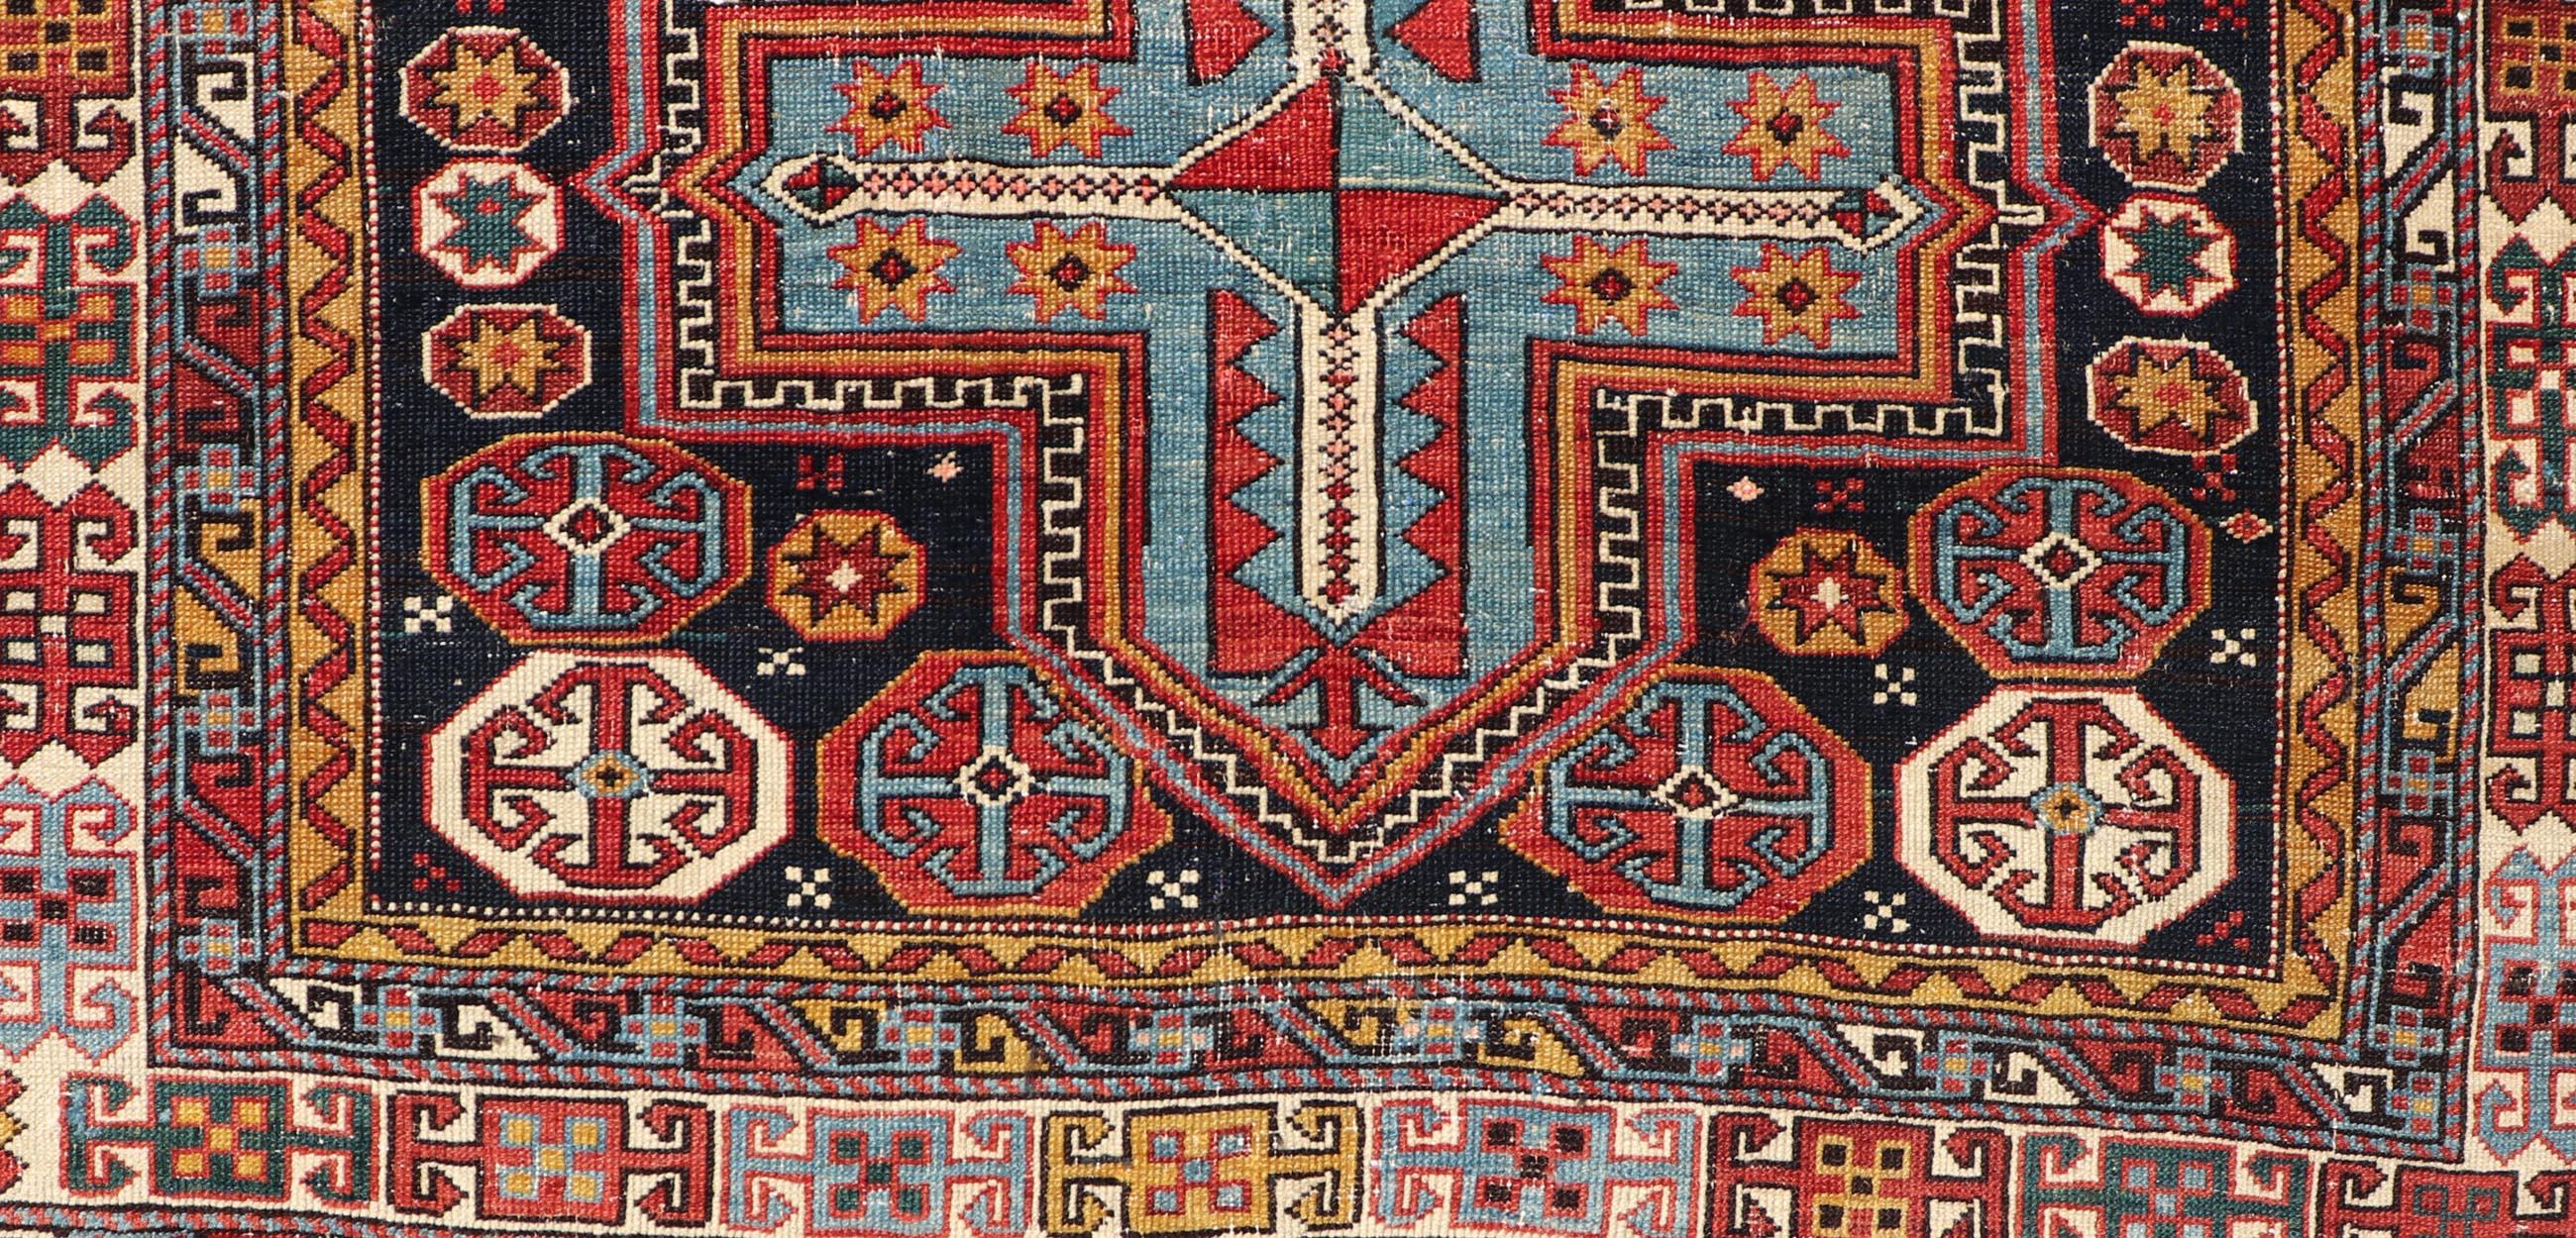 Sqaure antique colorful Kuba Caucasian rug with Cross Medallions. Keivan Woven Arts. Rug R20-0818, country of origin / type: Caucuses / Kuba, circa late-19th century.
Measures: 3'11 x 4'8
This wonderfully colored Kuba rug from the southern